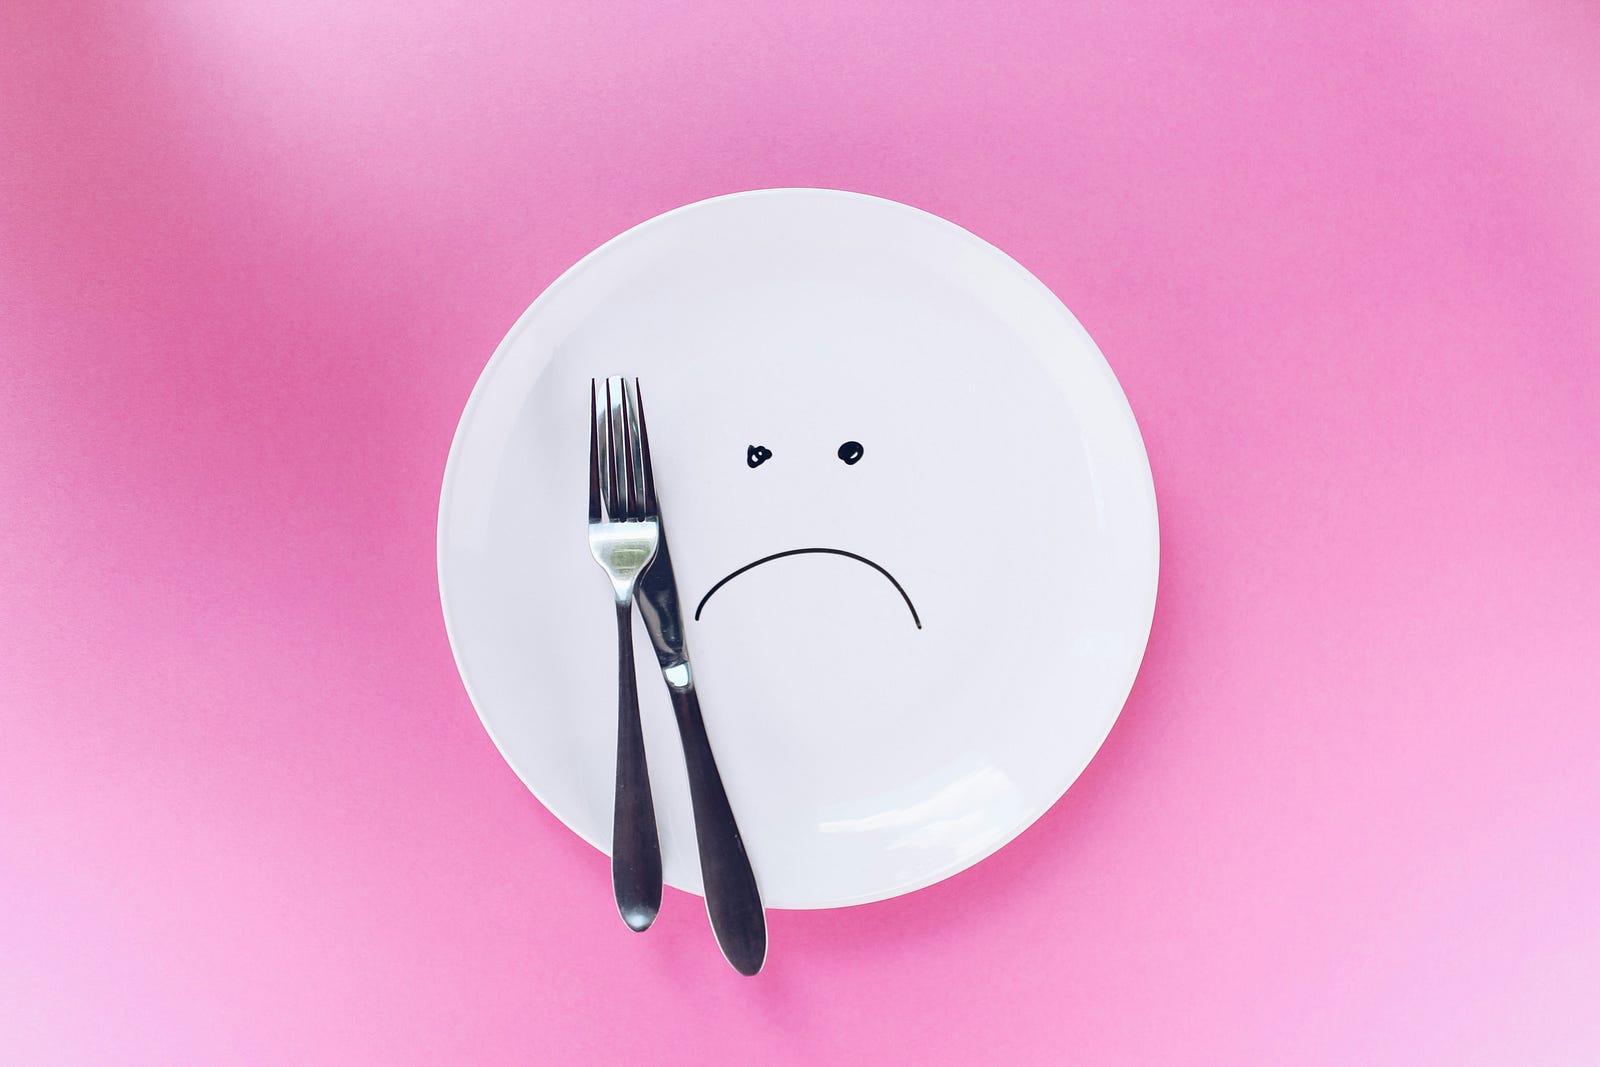 A plate has a sad face written on it. Pink background. Diet is a central component of trying to slow aging.